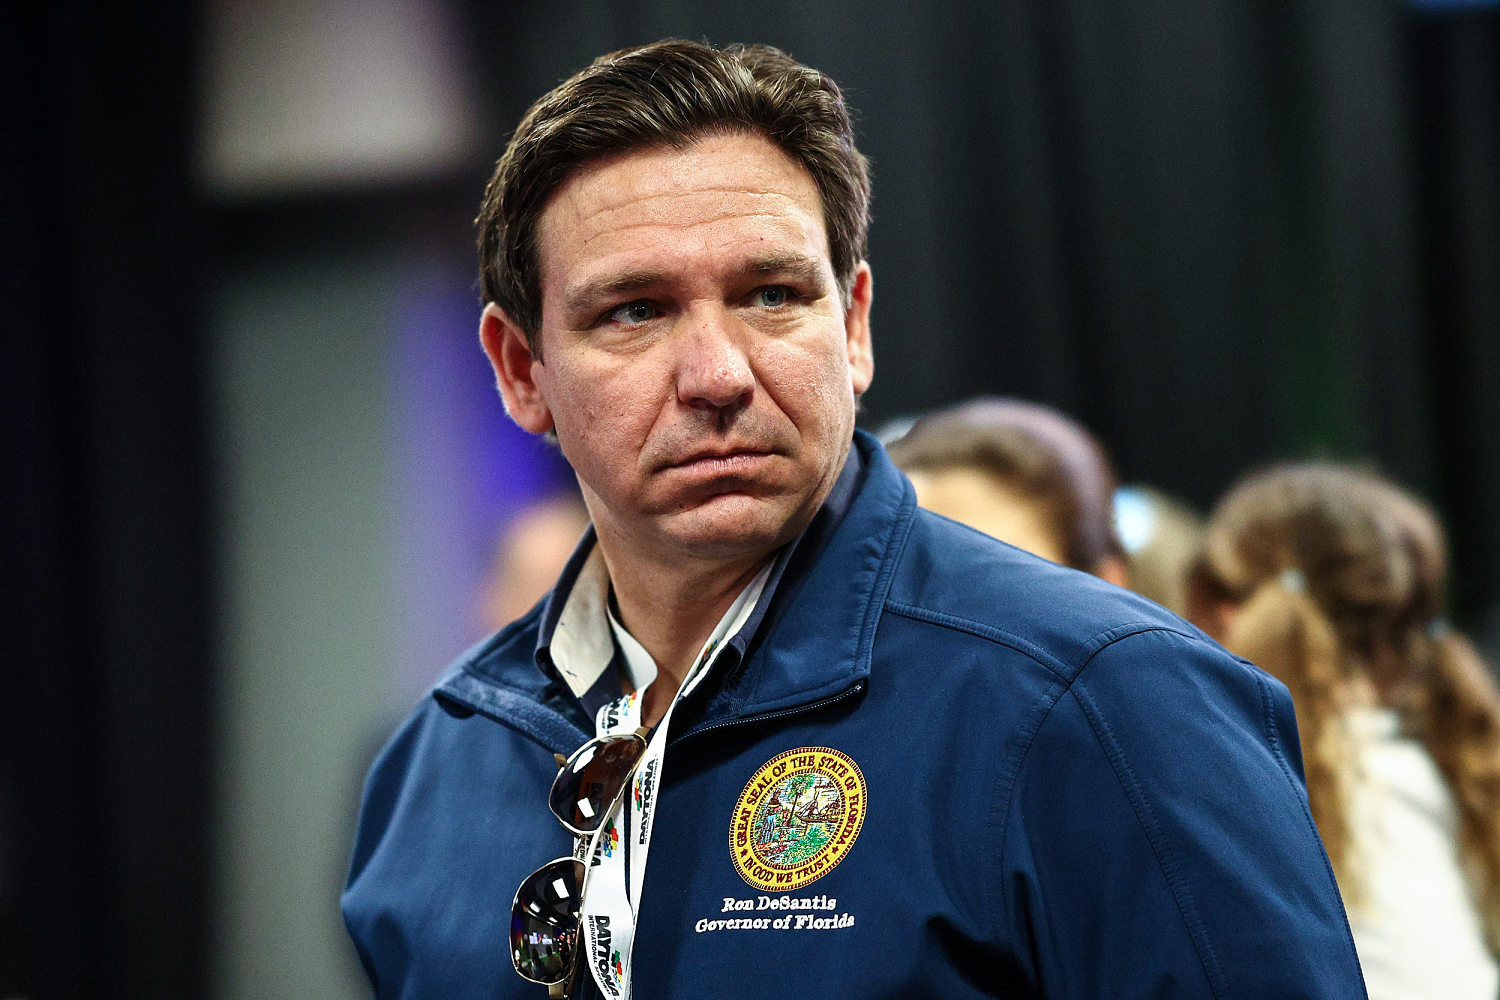 ron desantis shares his concerns about trump in a private call with supporters